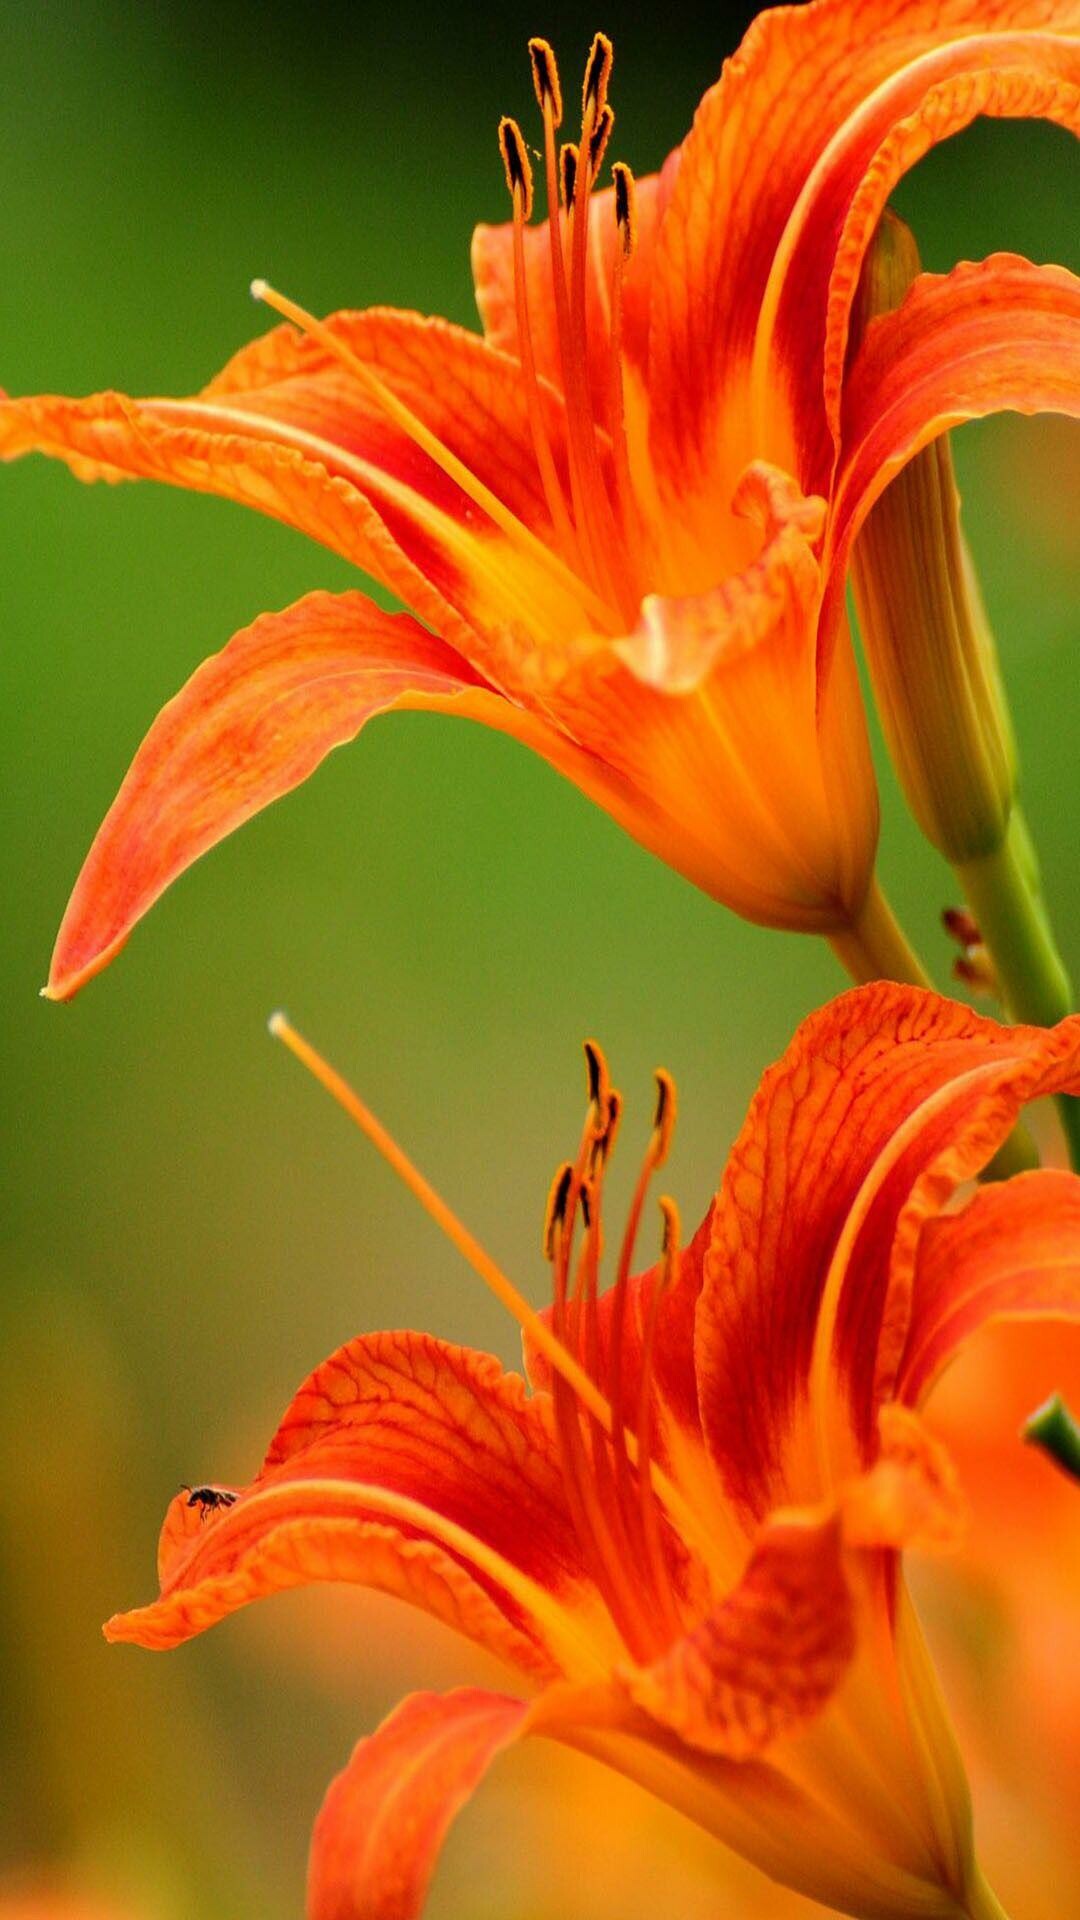 Orange lily, Vibrant wallpapers, Striking beauty, Nature, 1080x1920 Full HD Phone